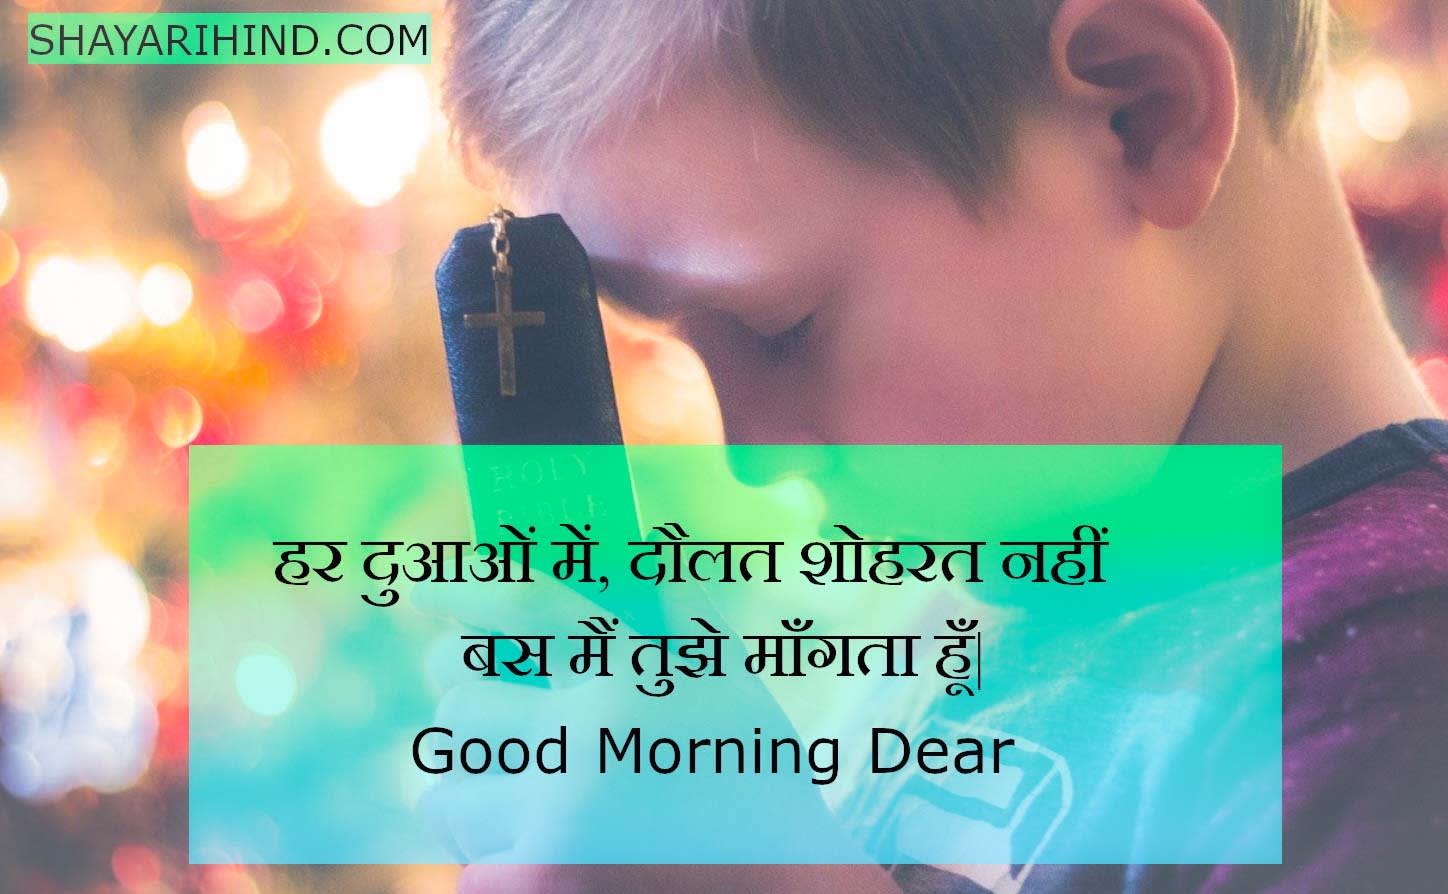 Good Morning Quotes in Hindi With Images For Whatsapp